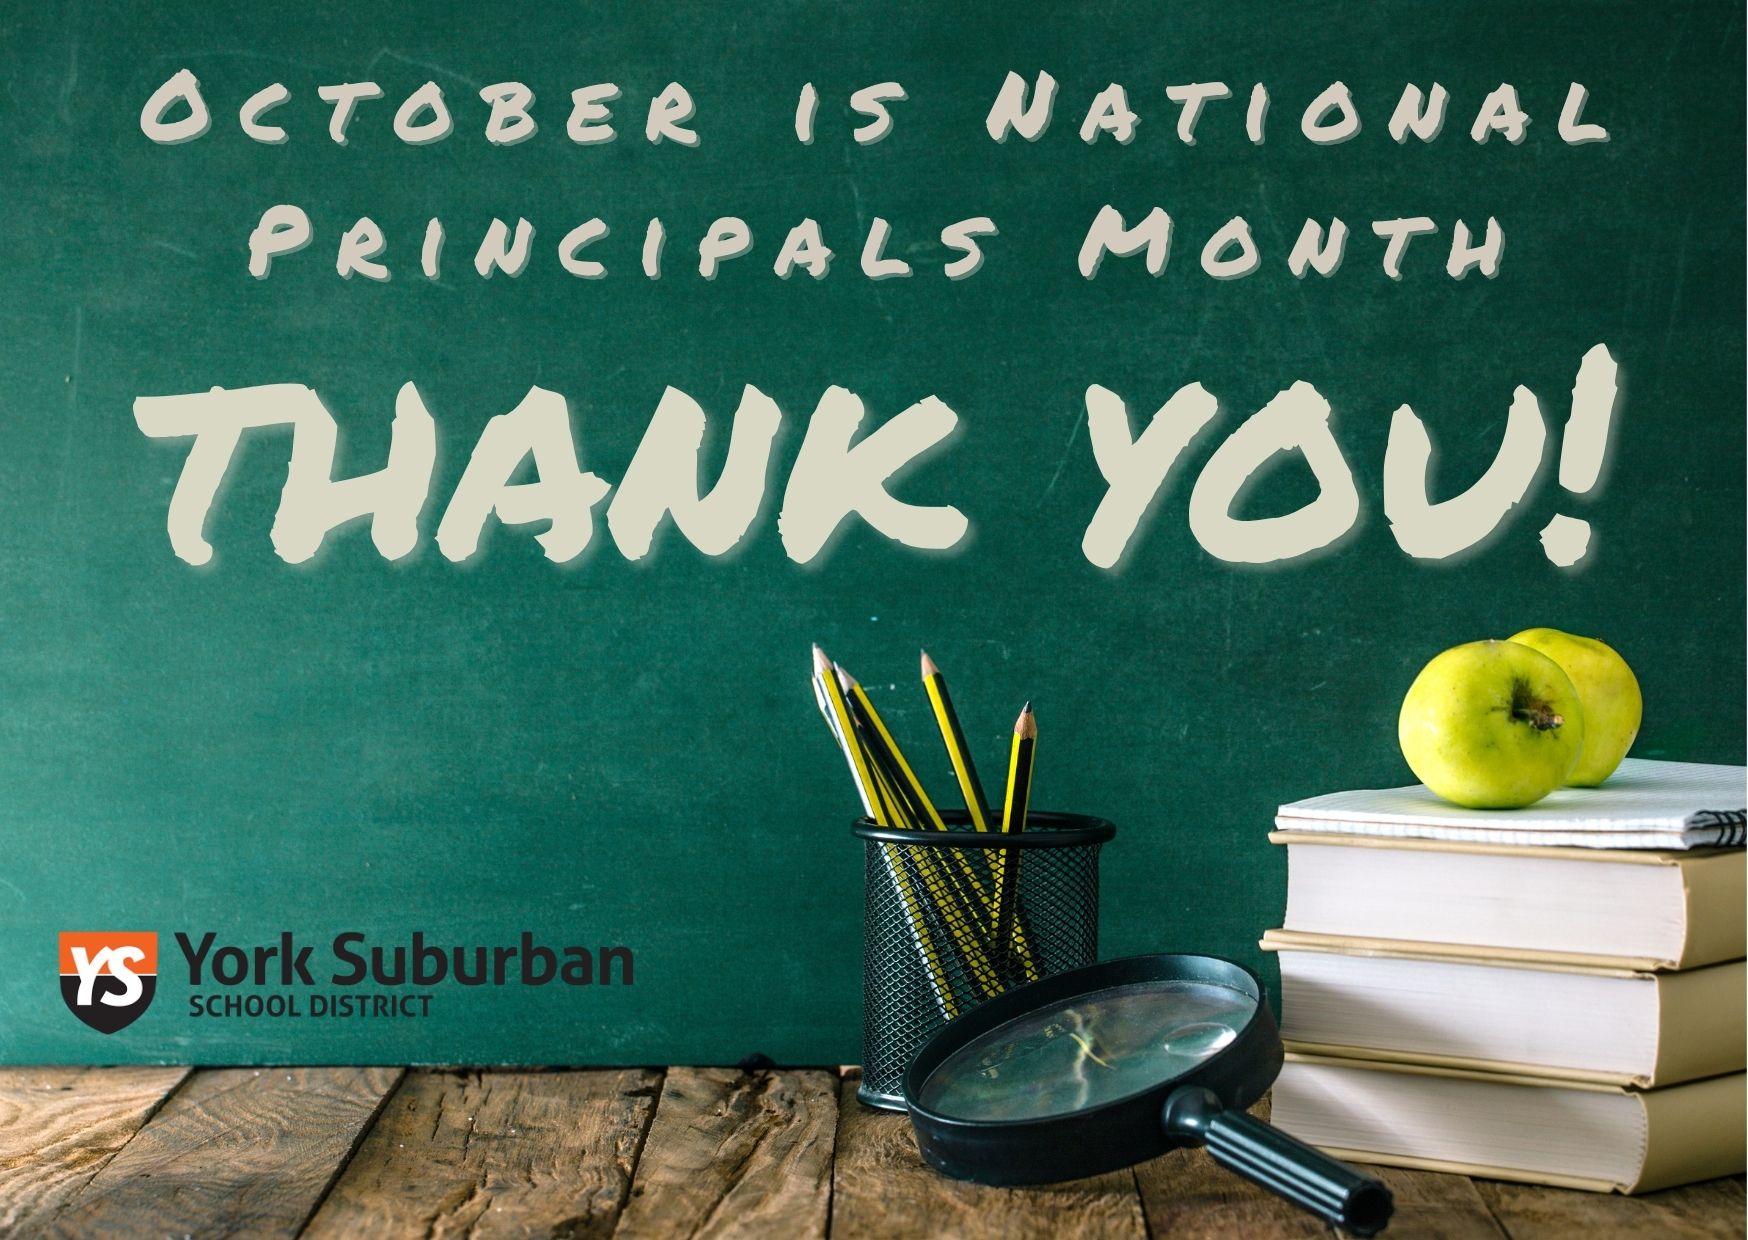 Image for National Principals Month